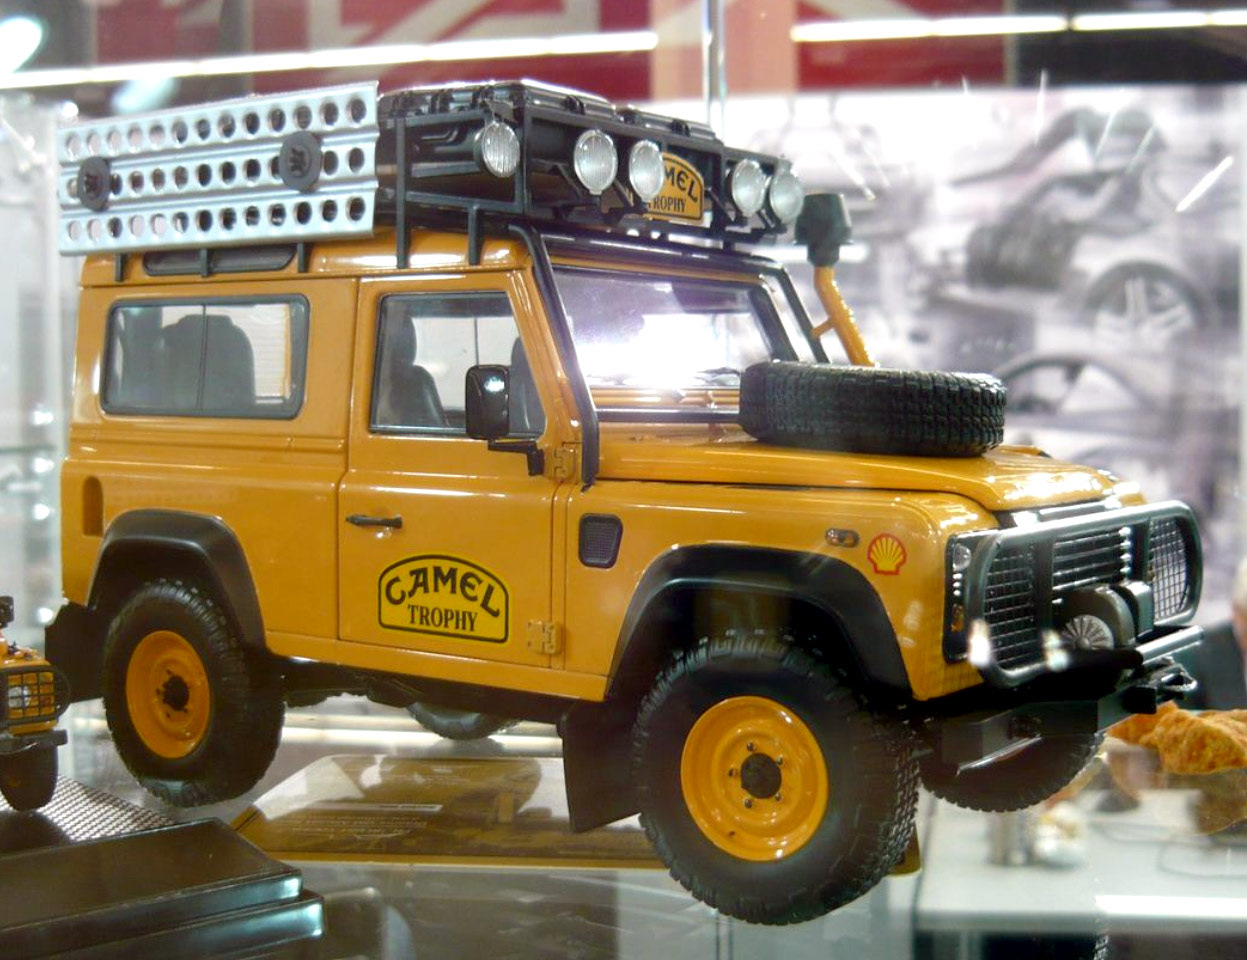 Defender real. Кэмел трофи 1983. Land-Rover 109 Camel Trophy. Land Rover 110 1/18. Land Rover 110 Black almost real 1:18.